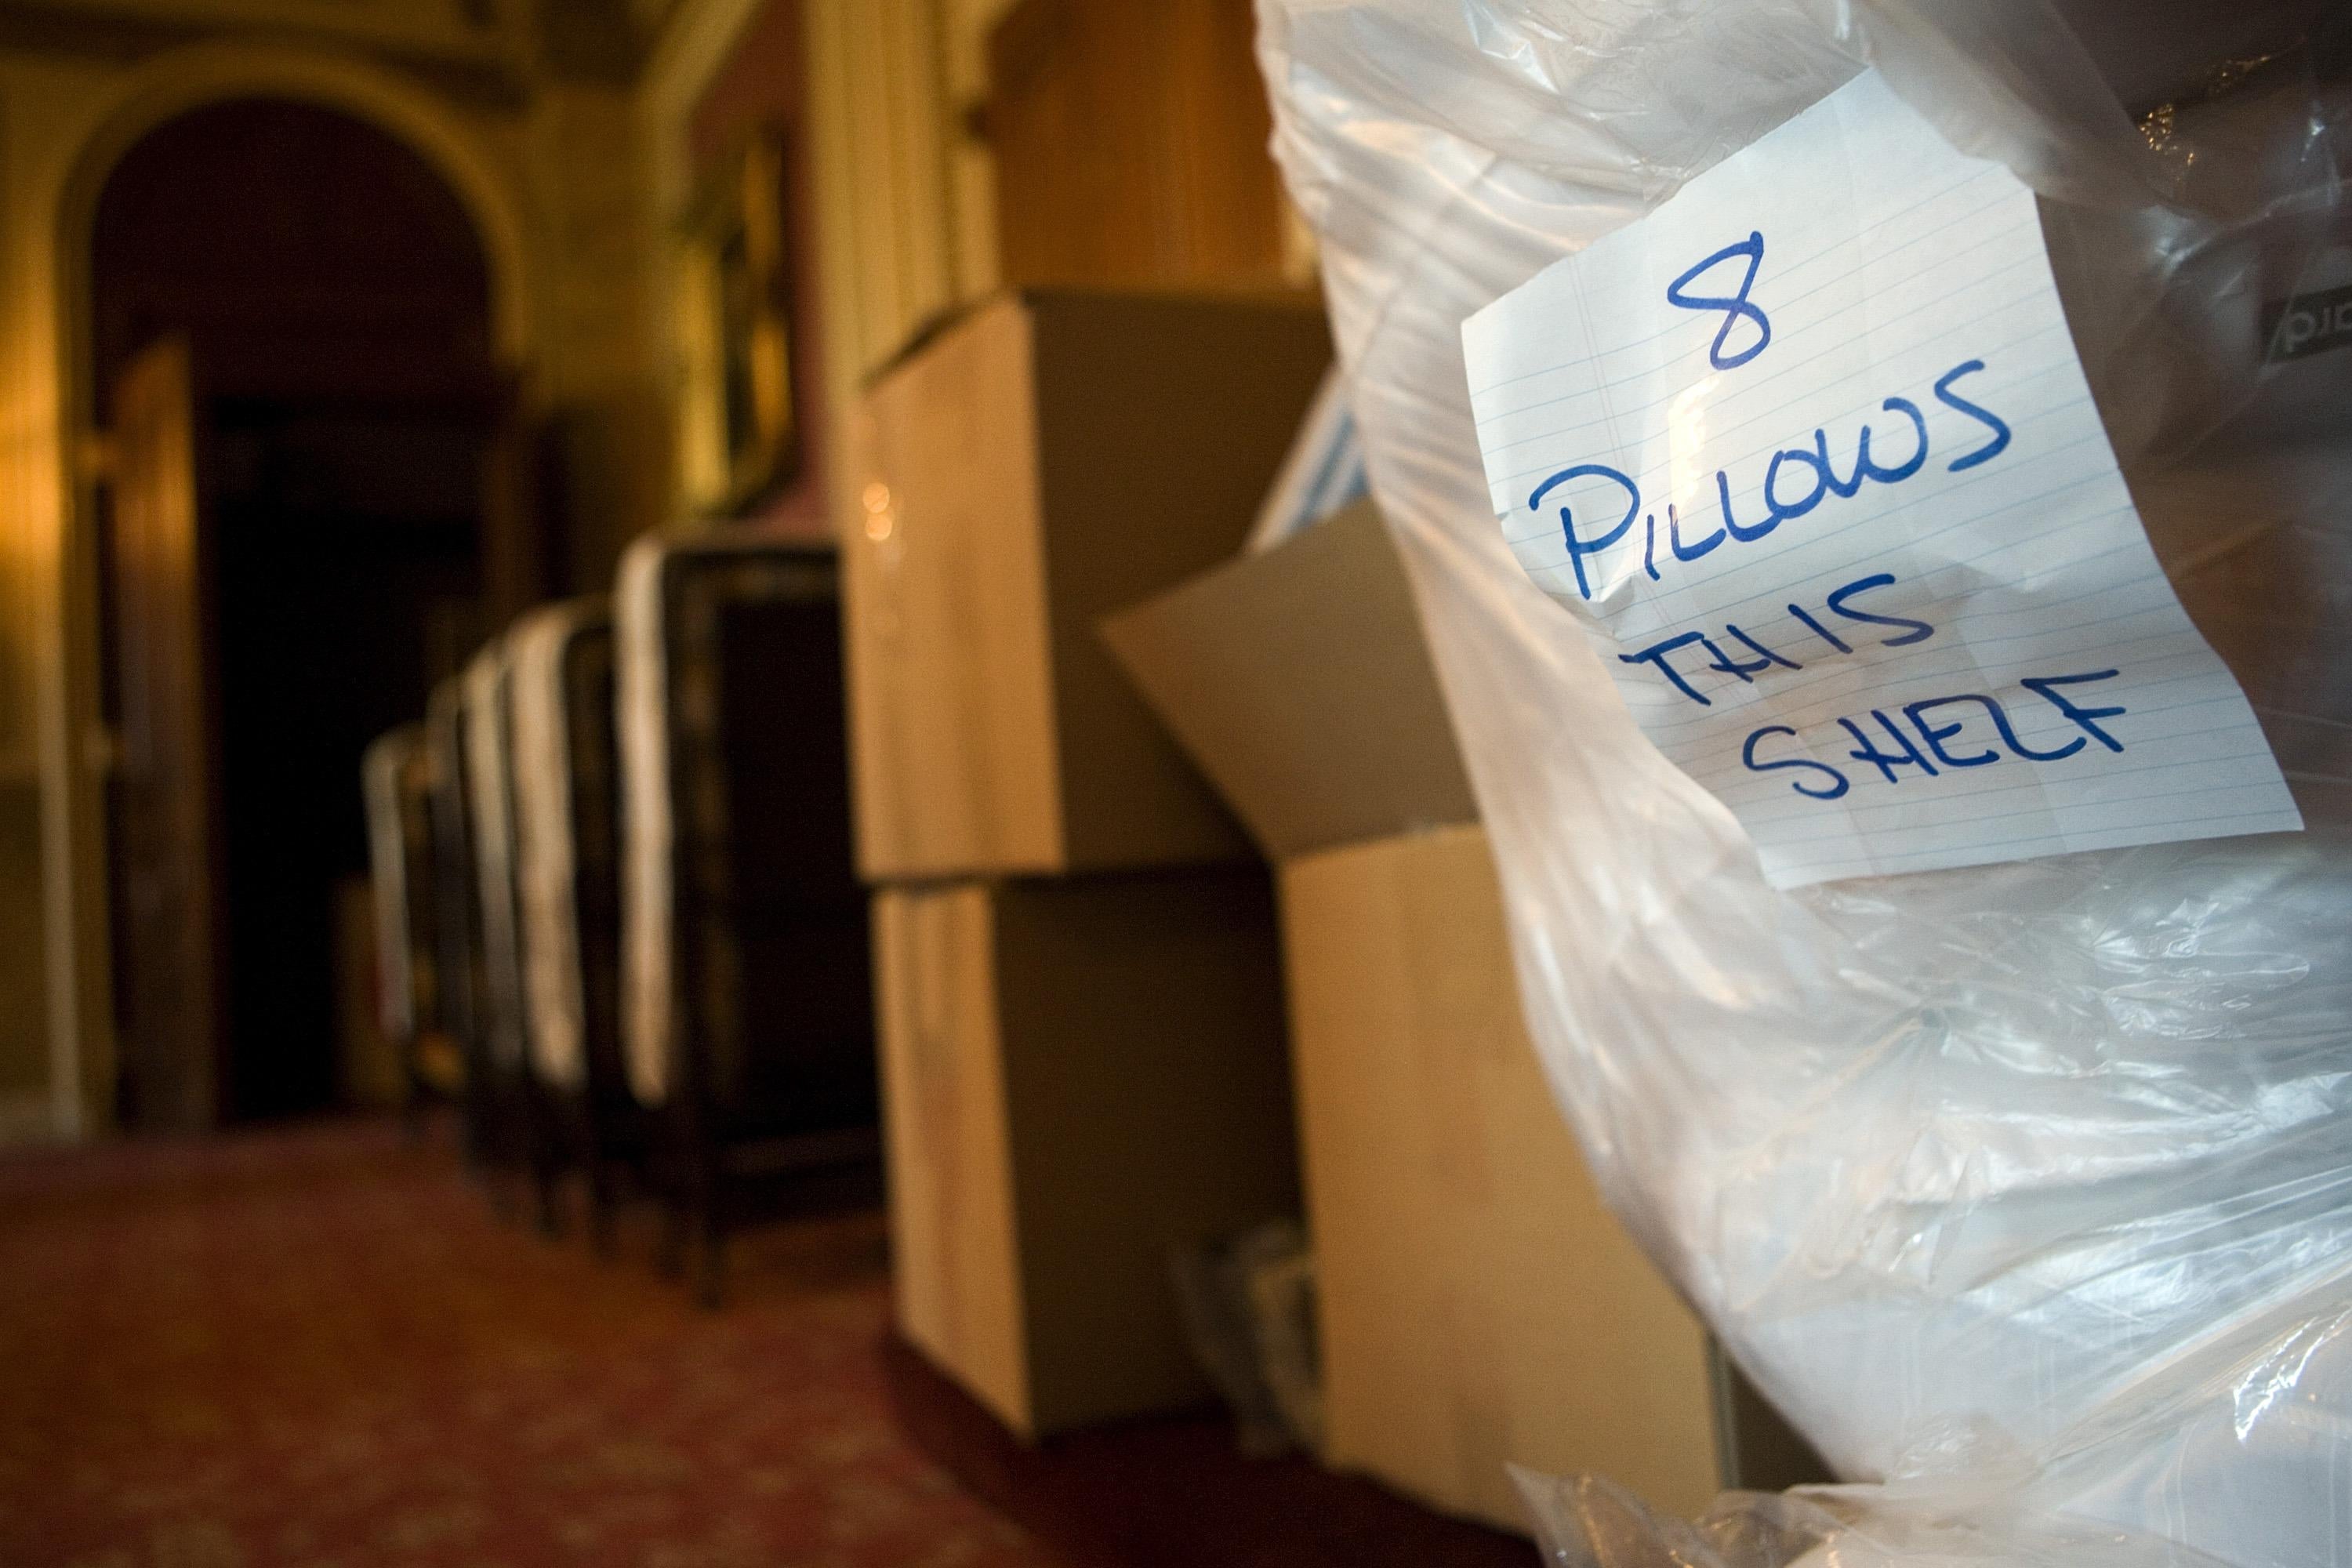 A piece of lined paper that says "8 pillows this shelf" taped to a large plastic bag of bedding next to some cardboard boxes in a hallway